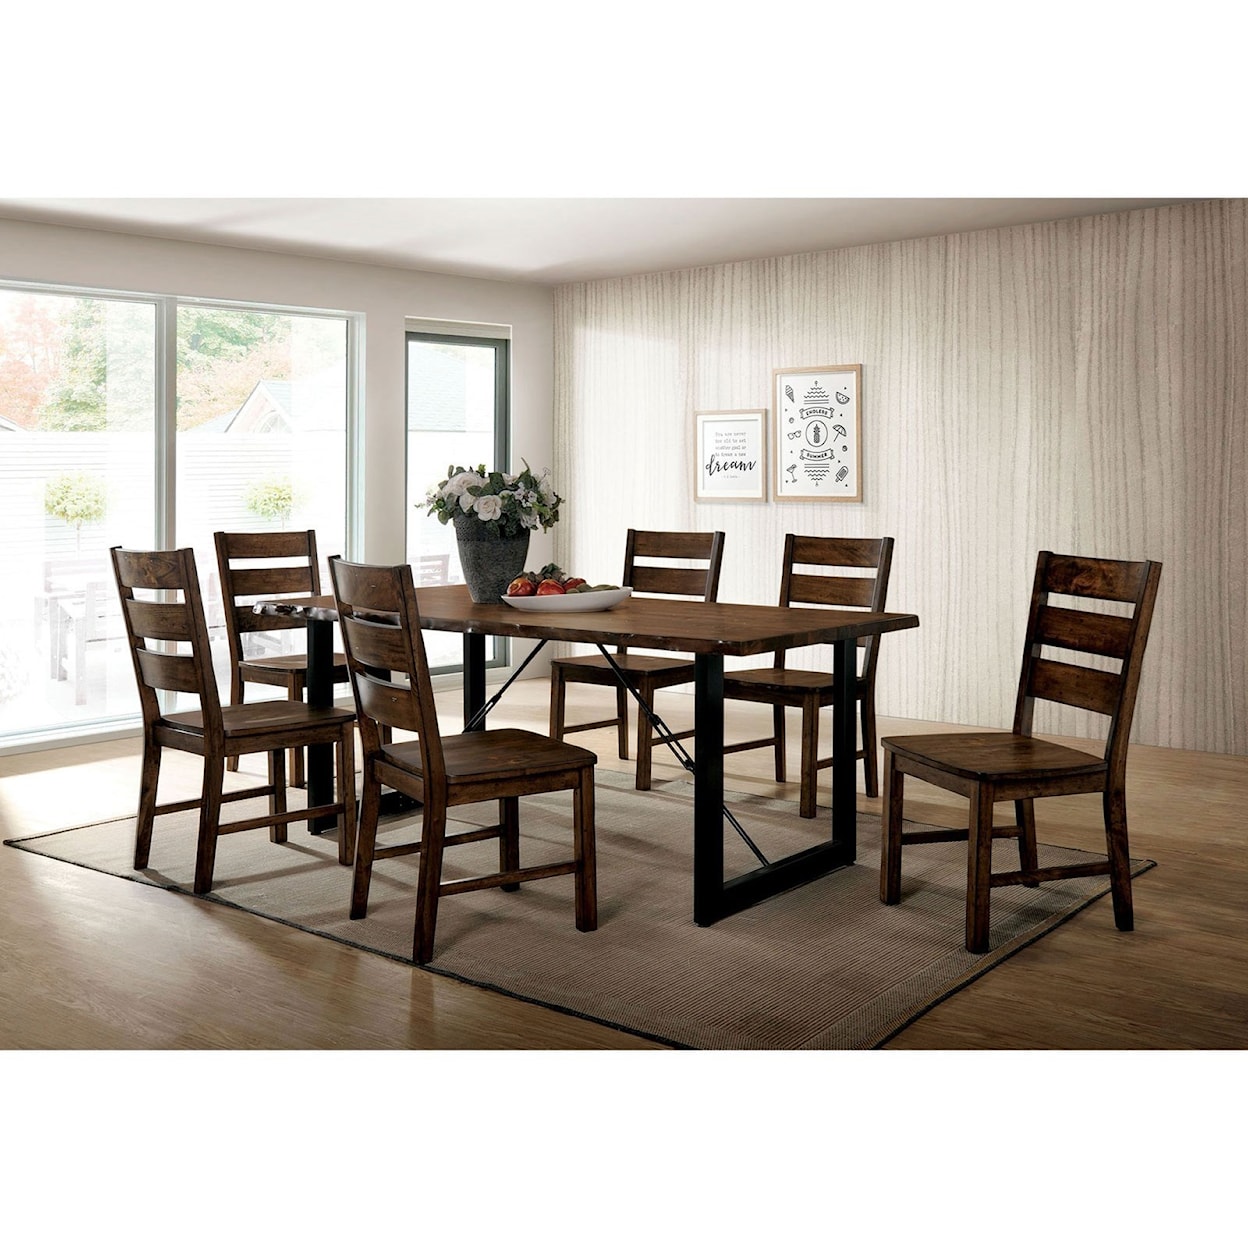 Furniture of America Dulce Dining Table